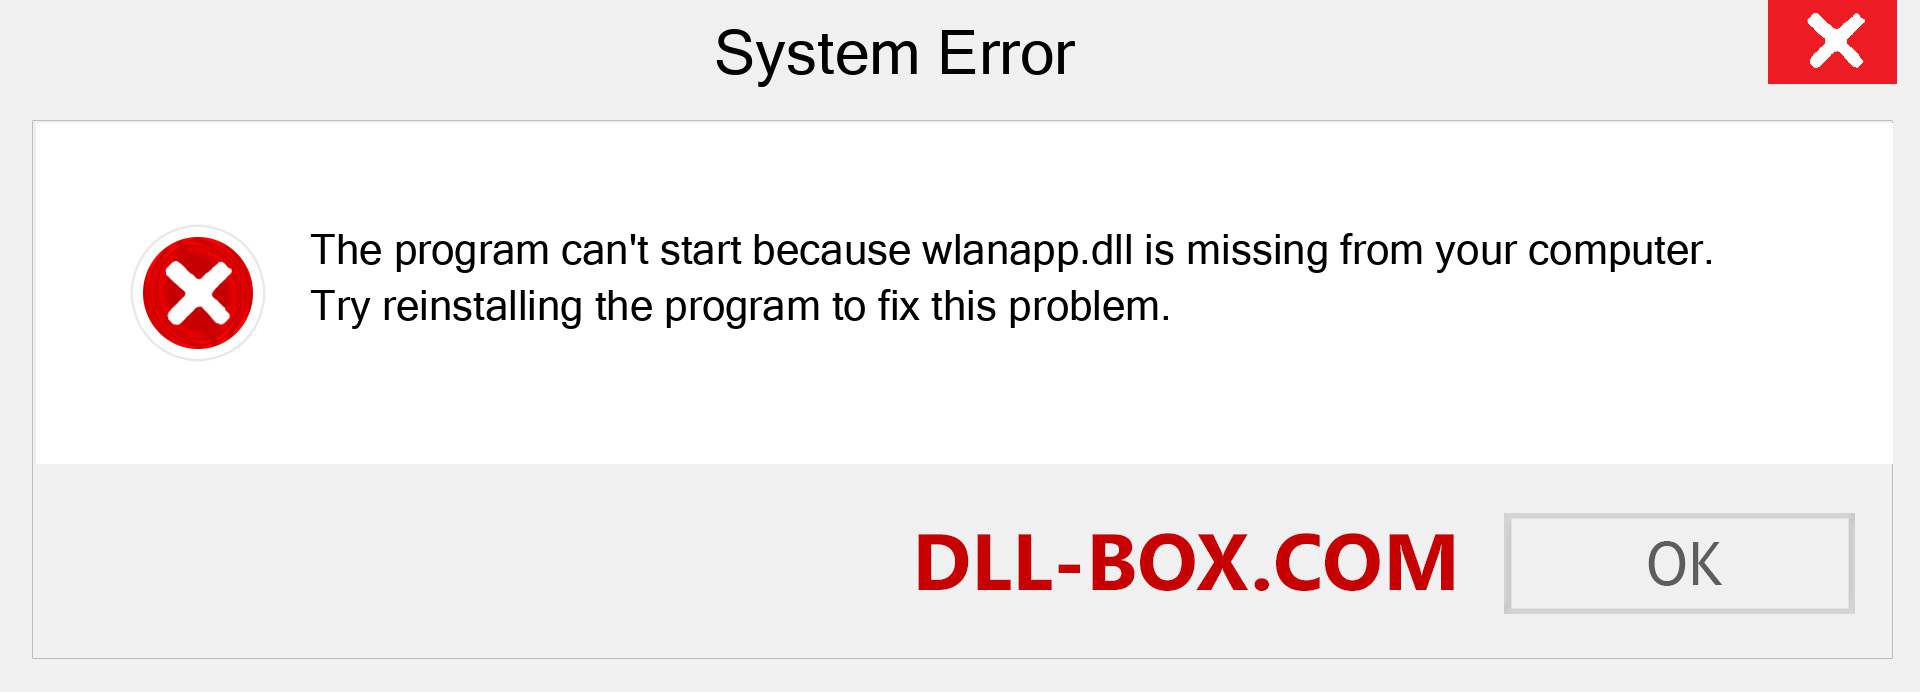  wlanapp.dll file is missing?. Download for Windows 7, 8, 10 - Fix  wlanapp dll Missing Error on Windows, photos, images